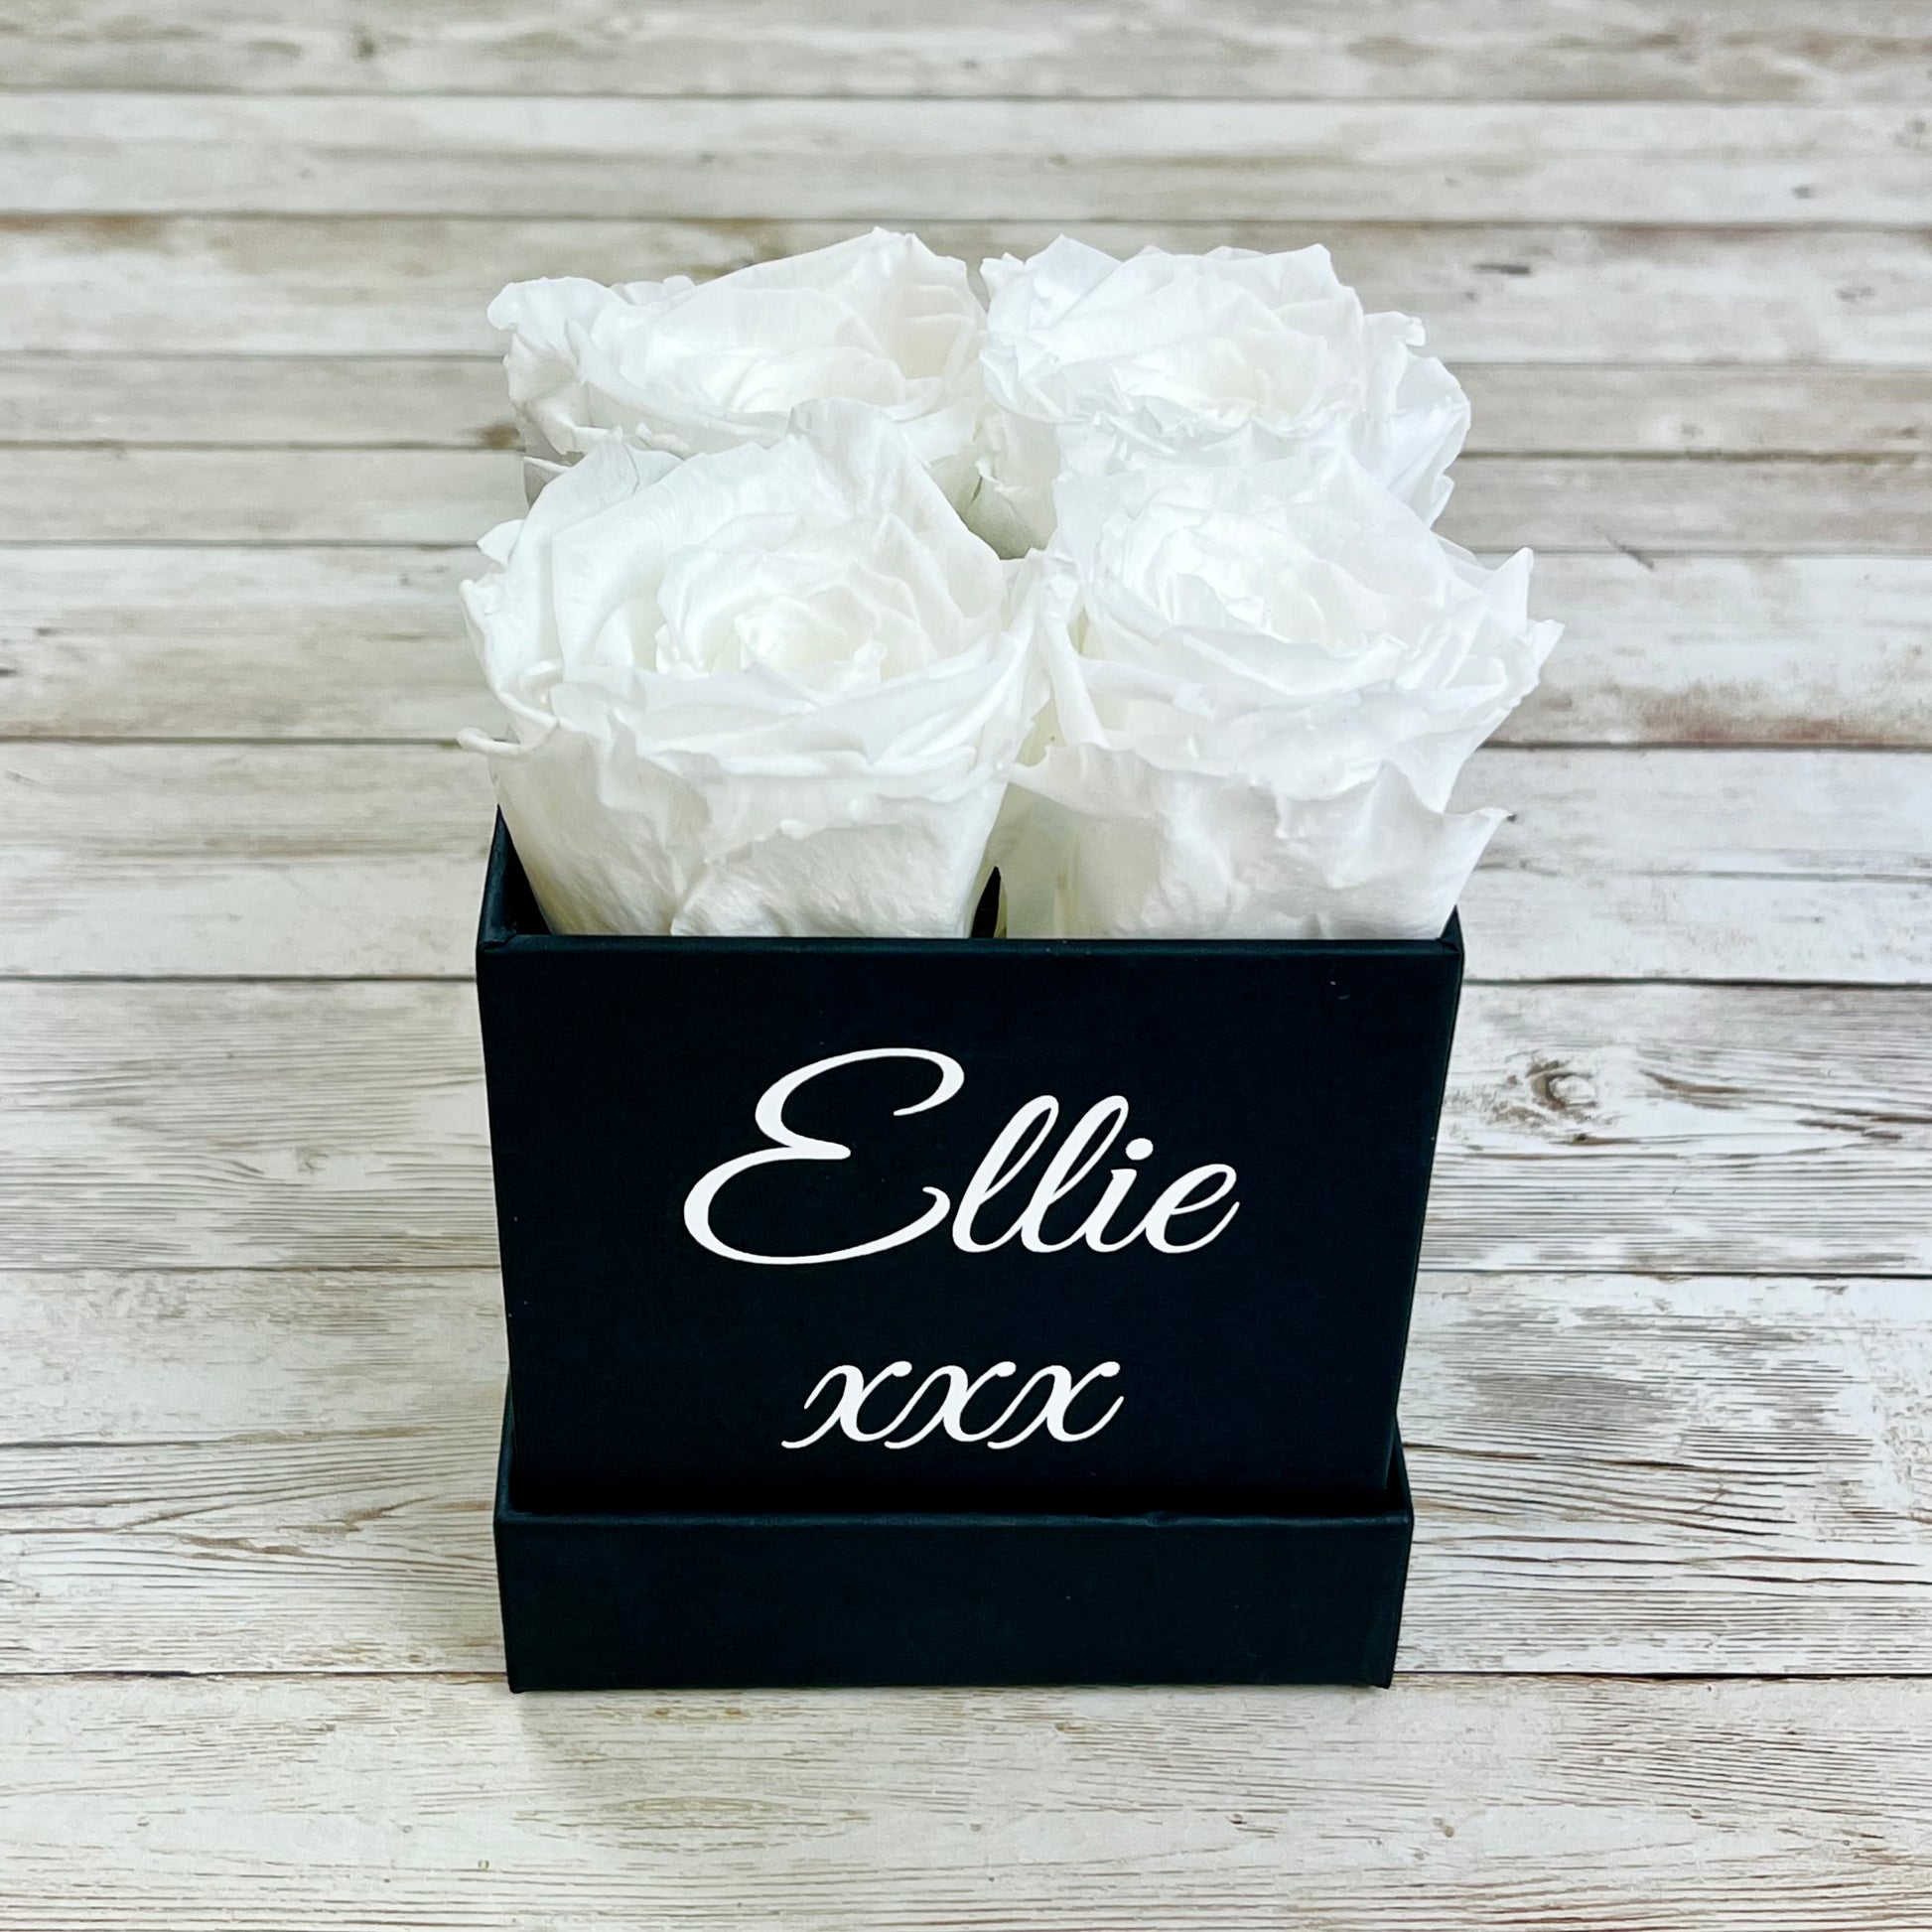 Black Square Petite Infinity Rose Box - Infinity Roses - White One Year Roses - Box of Roses - Rose Colours divider-Angelic White